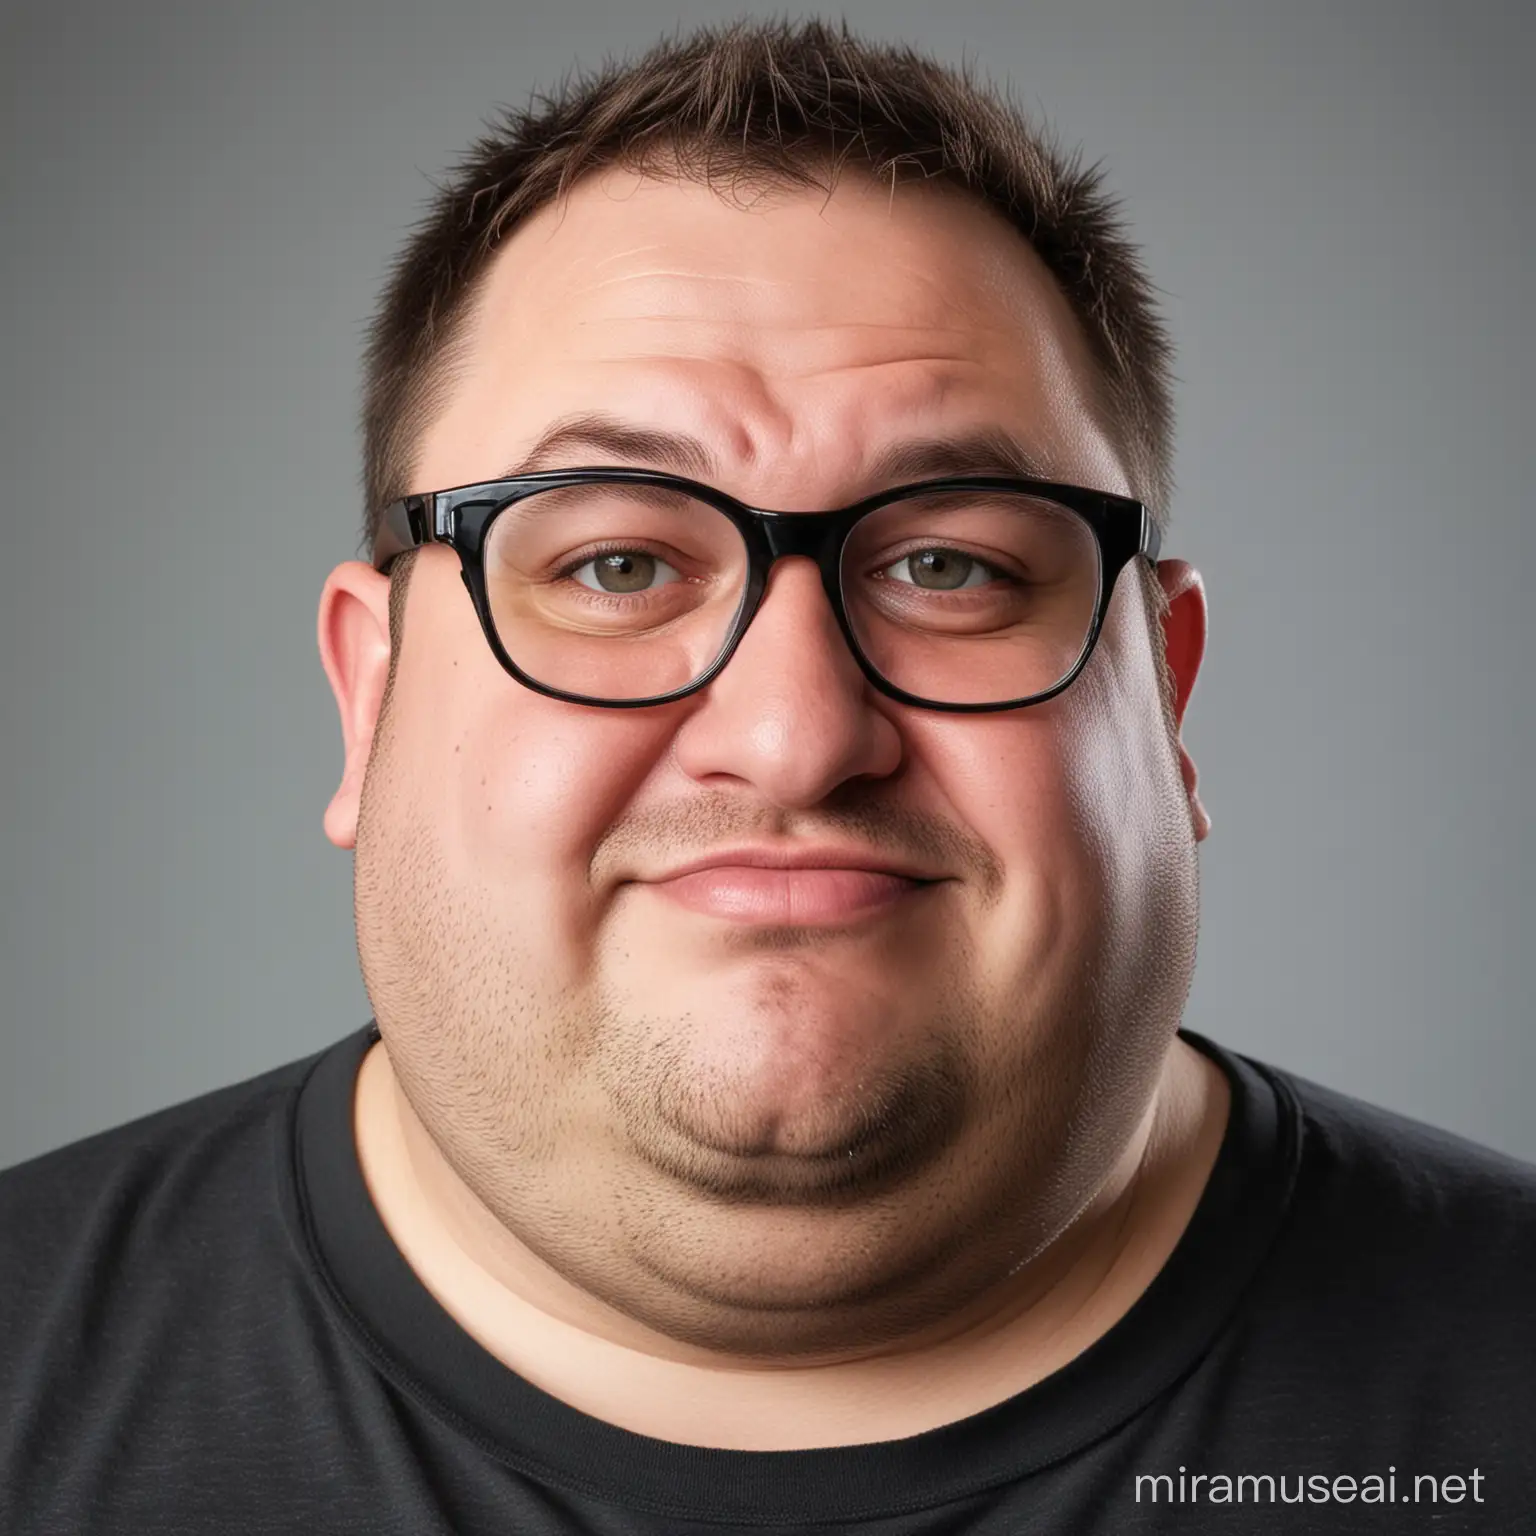 Portly Man with Unattractive Facial Features Wearing Glasses